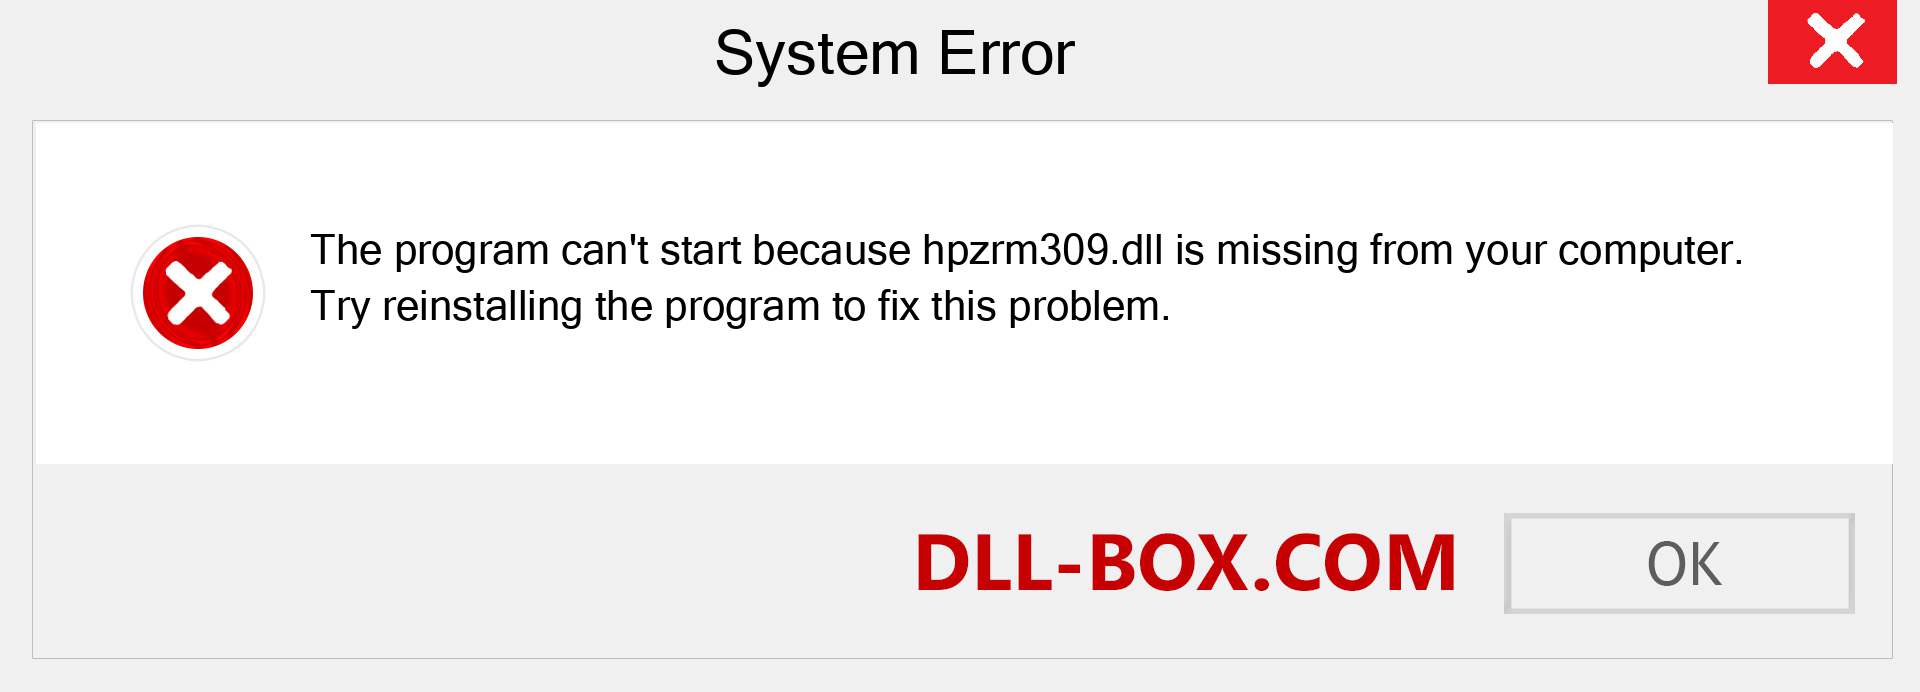  hpzrm309.dll file is missing?. Download for Windows 7, 8, 10 - Fix  hpzrm309 dll Missing Error on Windows, photos, images